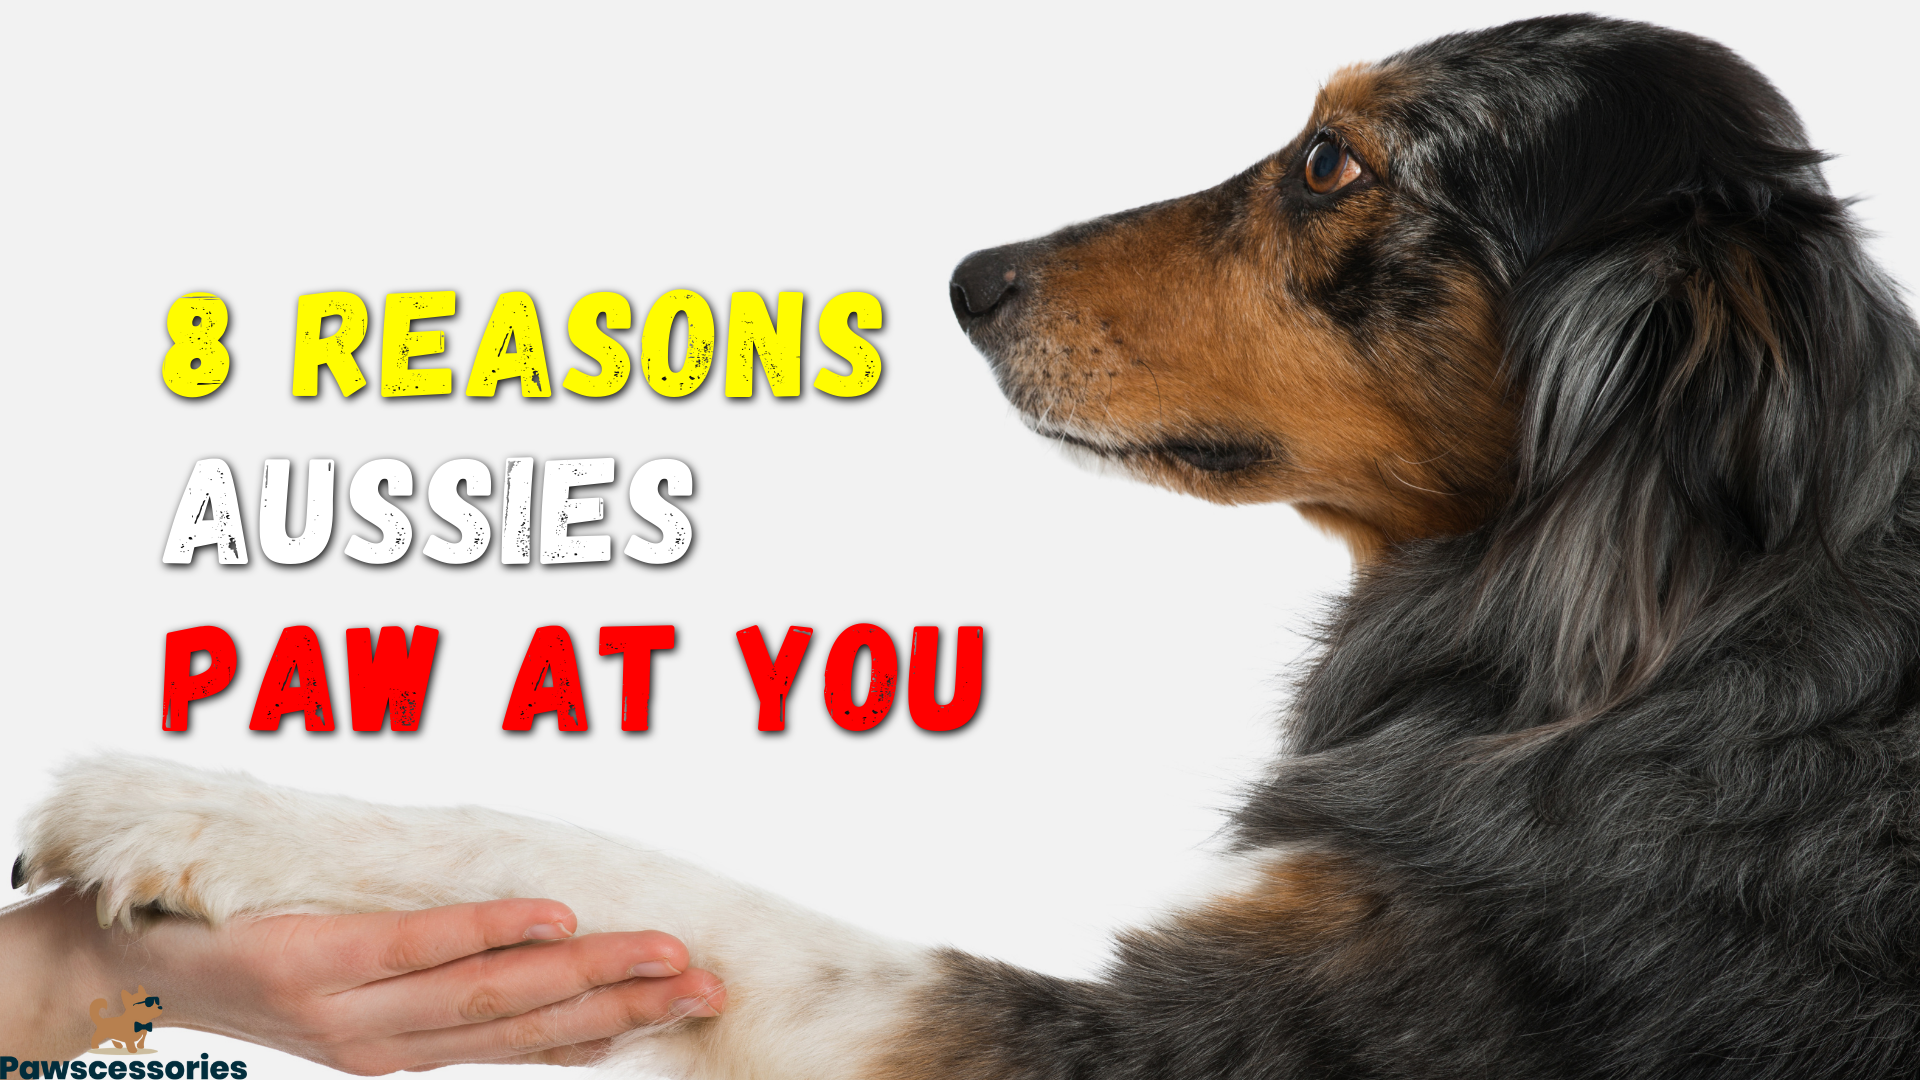 Top 8 Reasons Why Australian Shepherds Paw At You + 3 Tips